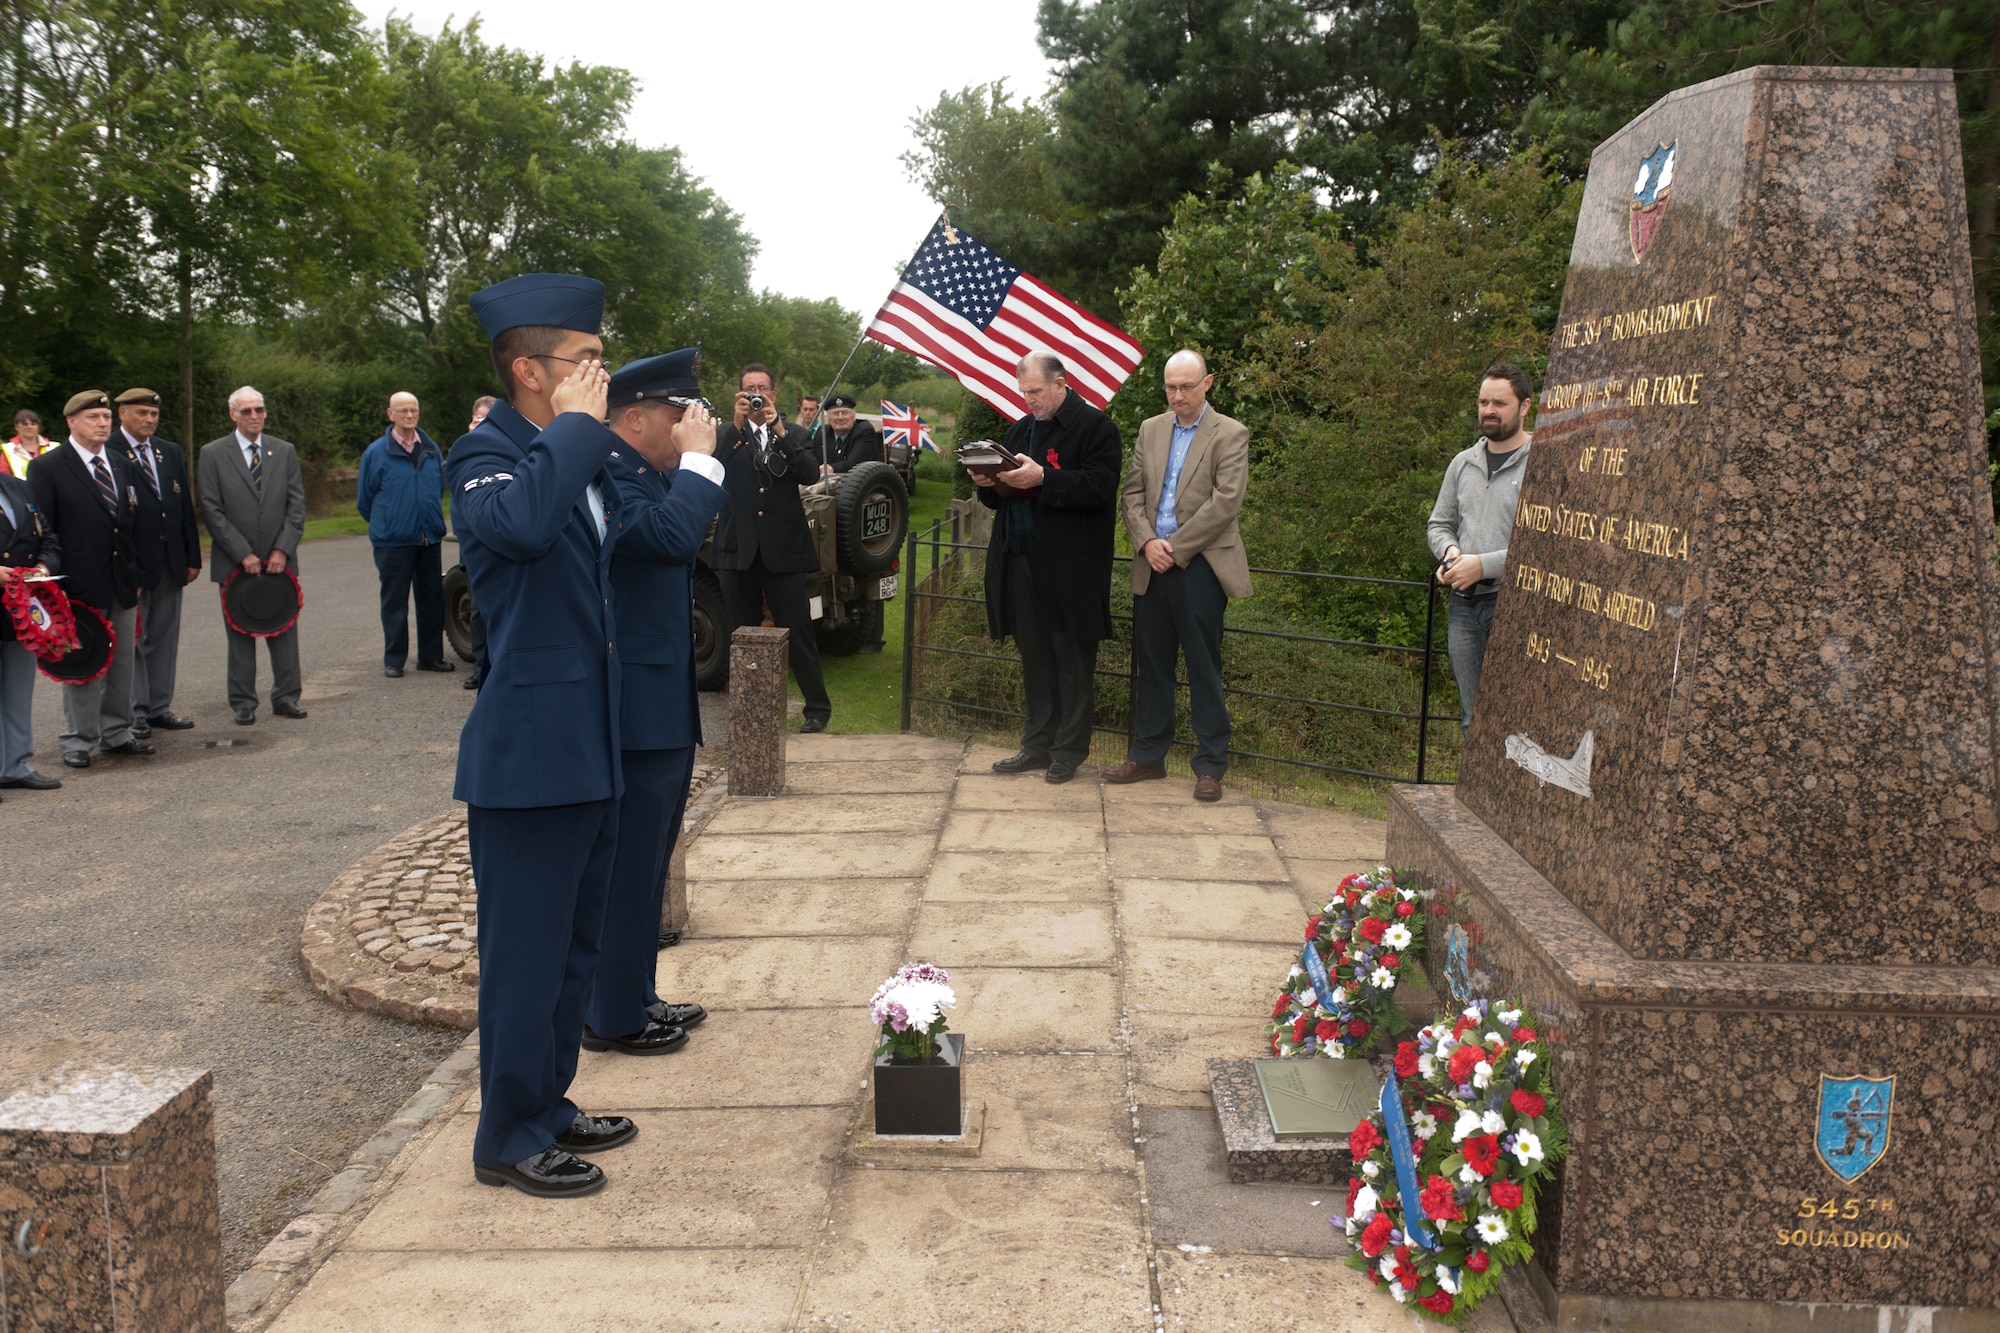 GRAFTON UNDERWOOD, United Kingdom – Col. Brian Kelly, 501st Combat Support wing commander, and Airman 1st Class Brandon Gogue, 423rd Communication Squadron, pay their respects to Eighth Air Force Airmen at the memorial near Grafton Underwood Aug. 17. The day marked the 70th anniversary of the first Eighth Air Force bombers, from the 97th Bombardment Group (Heavy), participating in World War II which launched from Grafton Underwood. Col. Frank Armstrong, 97th BG commander, and the 340th Bomb Squadron commander Maj. Paul Tibbets (who later flew the Enola Gay to Hiroshima, Japan, on the first atomic bomb mission) piloted the lead aircraft of the group, Butcher Shop. In the leading aircraft of the second flight, Yankee Doodle, flew Gen. Ira C. Eaker, the commanding general of the VIII Bomber Command. (U.S. Air Force photo by Staff Sgt. Brian Stives)